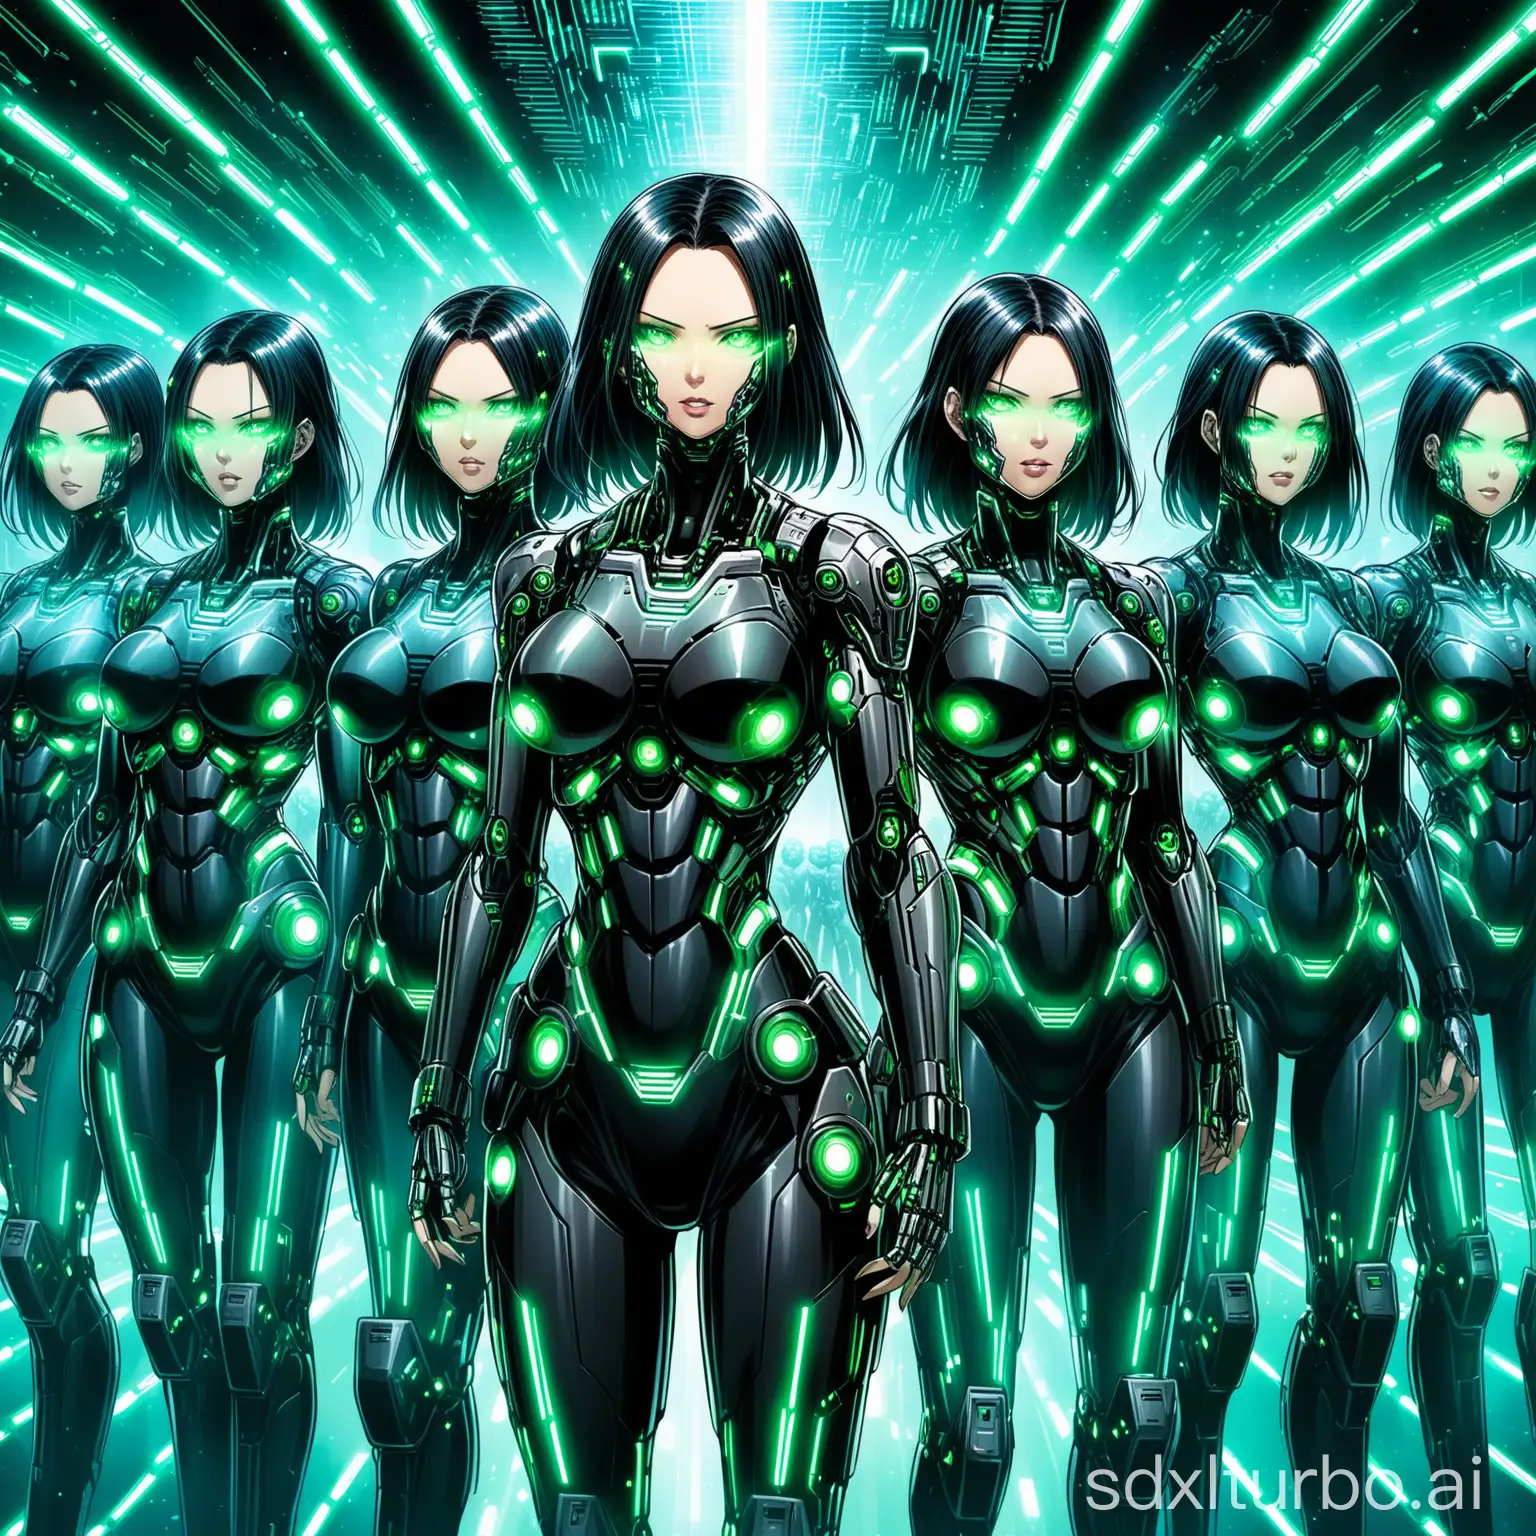 army of serious anime style borg girls, with cybernetic face implants, equipped with energy shields, combats against futuristic human soldiers